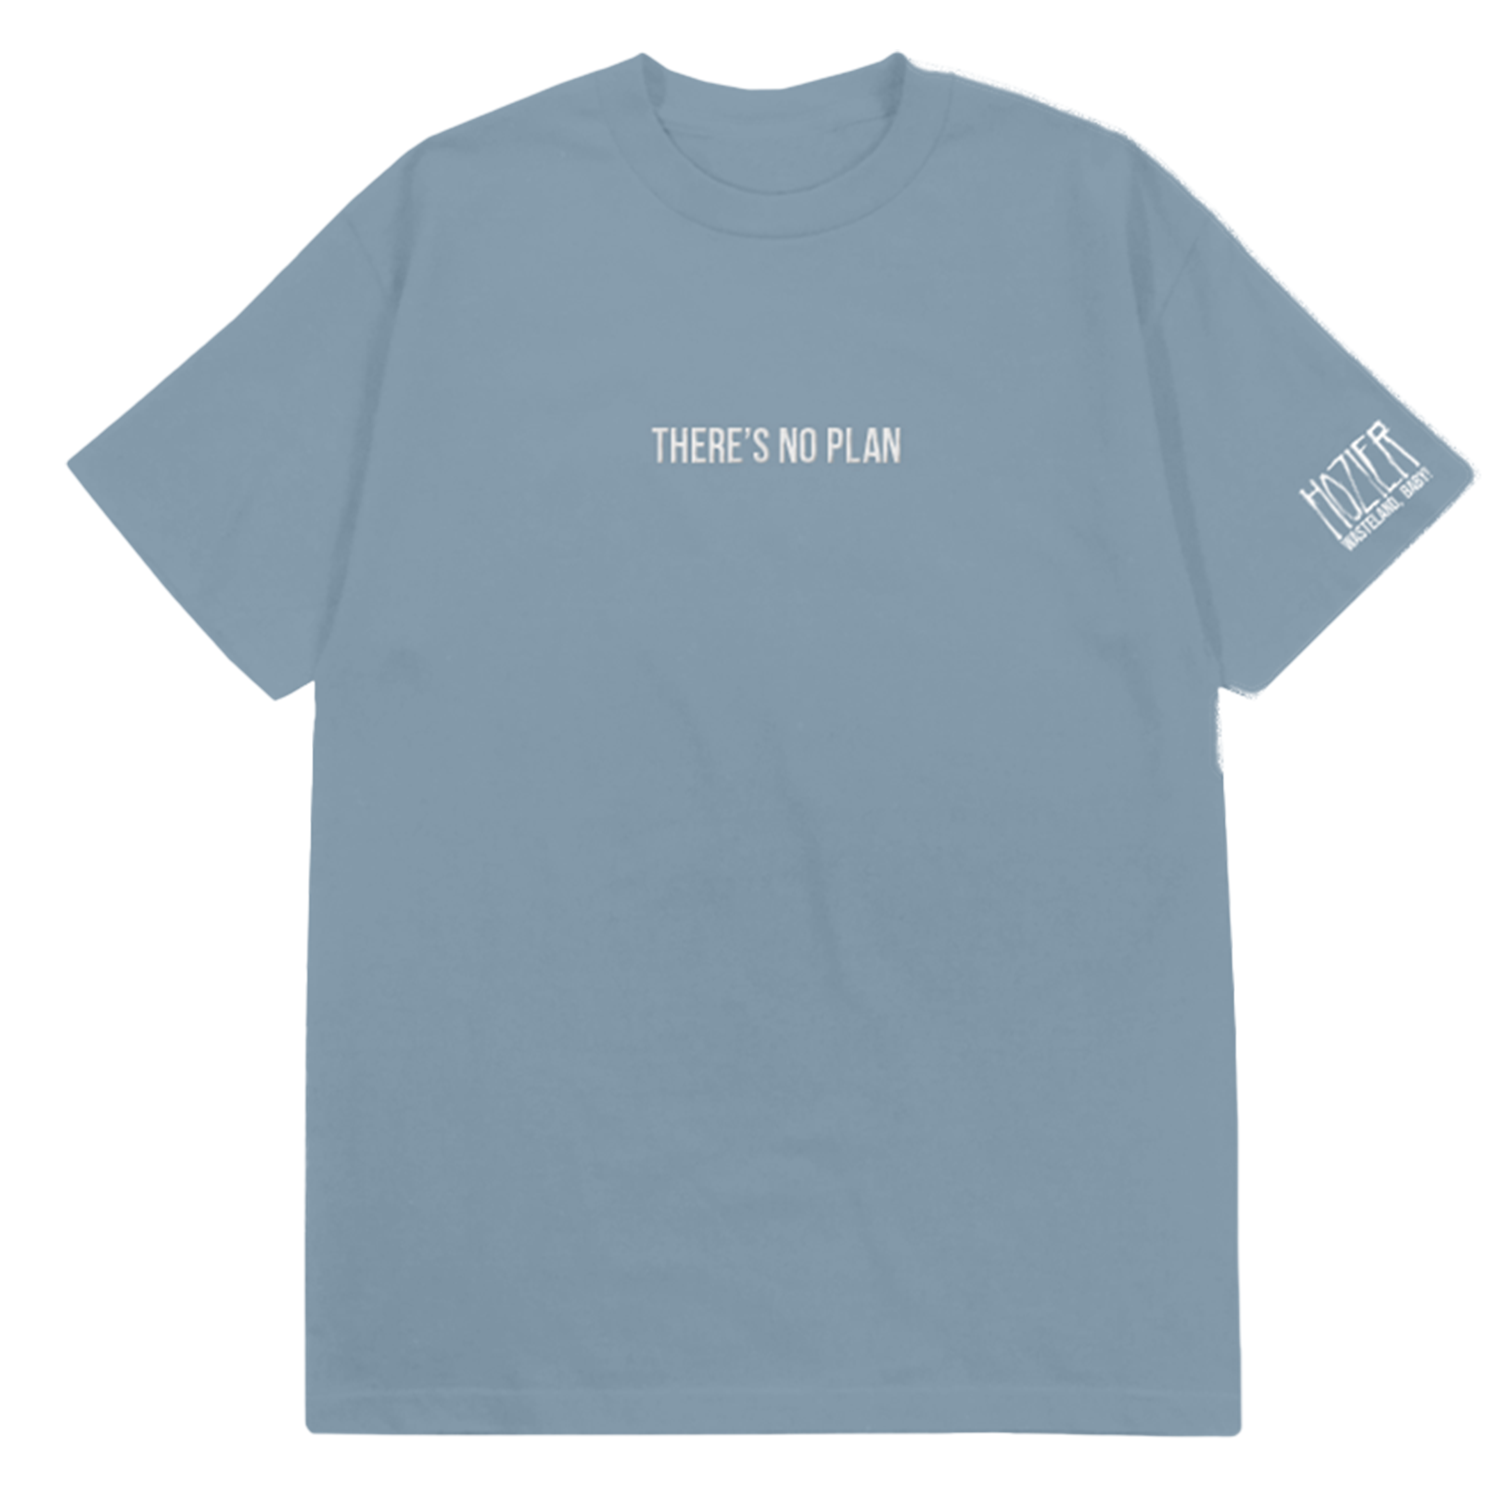 There's No Plan Stone Blue Tee